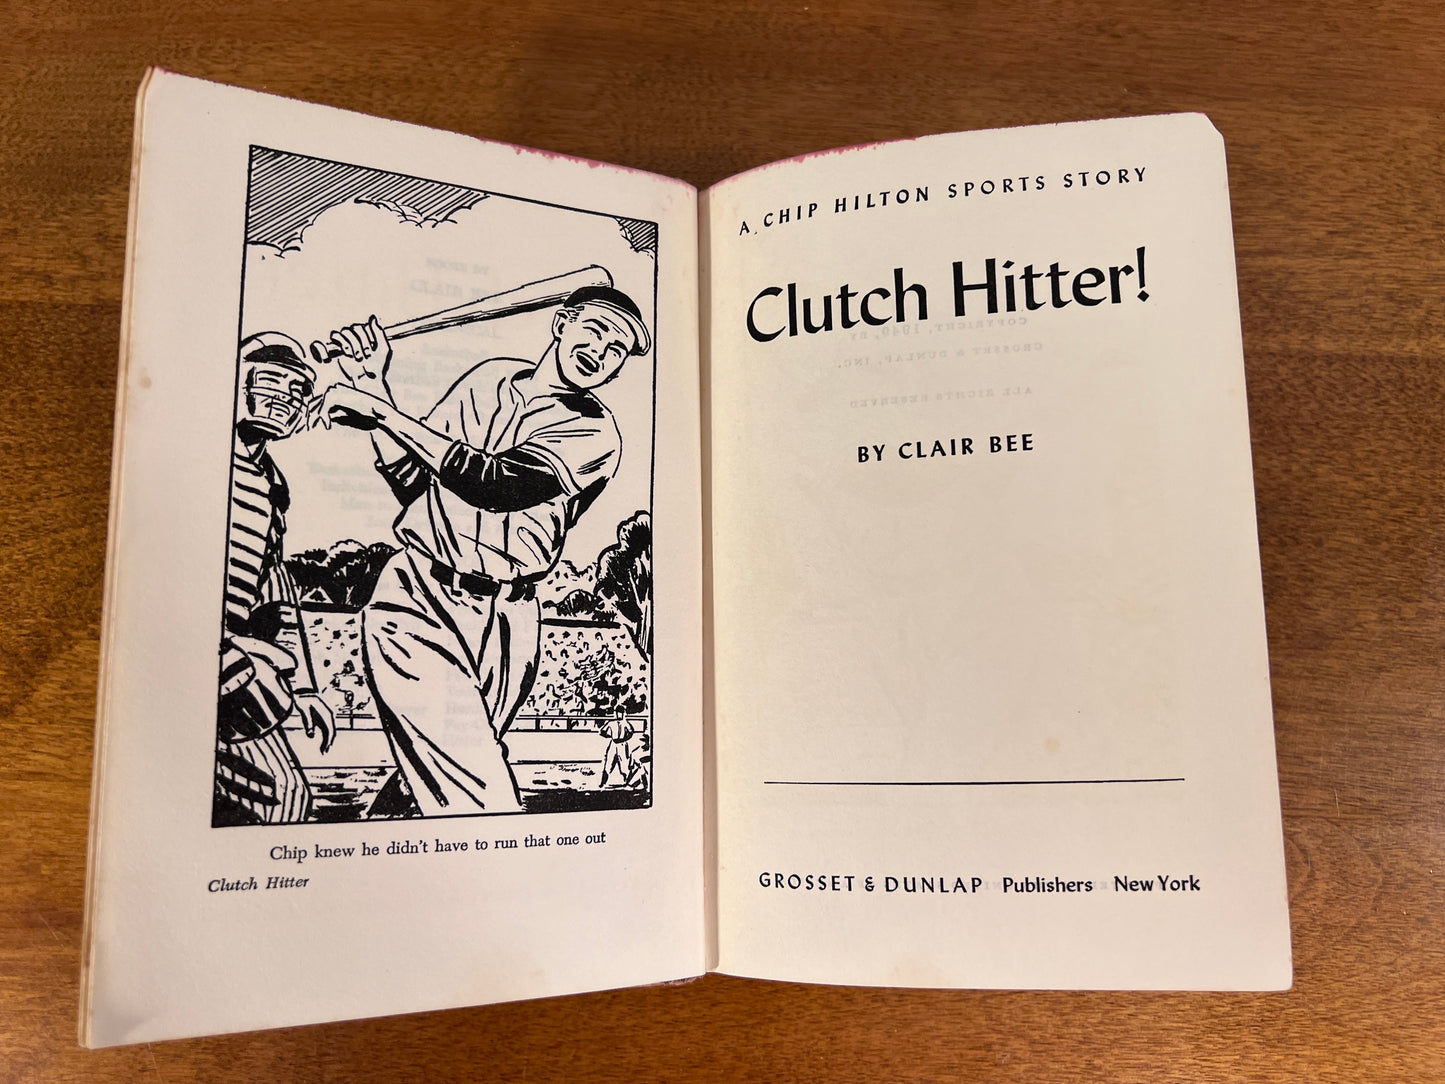 Clutch Hitter and Strike Three! by Clair Bee, 1949